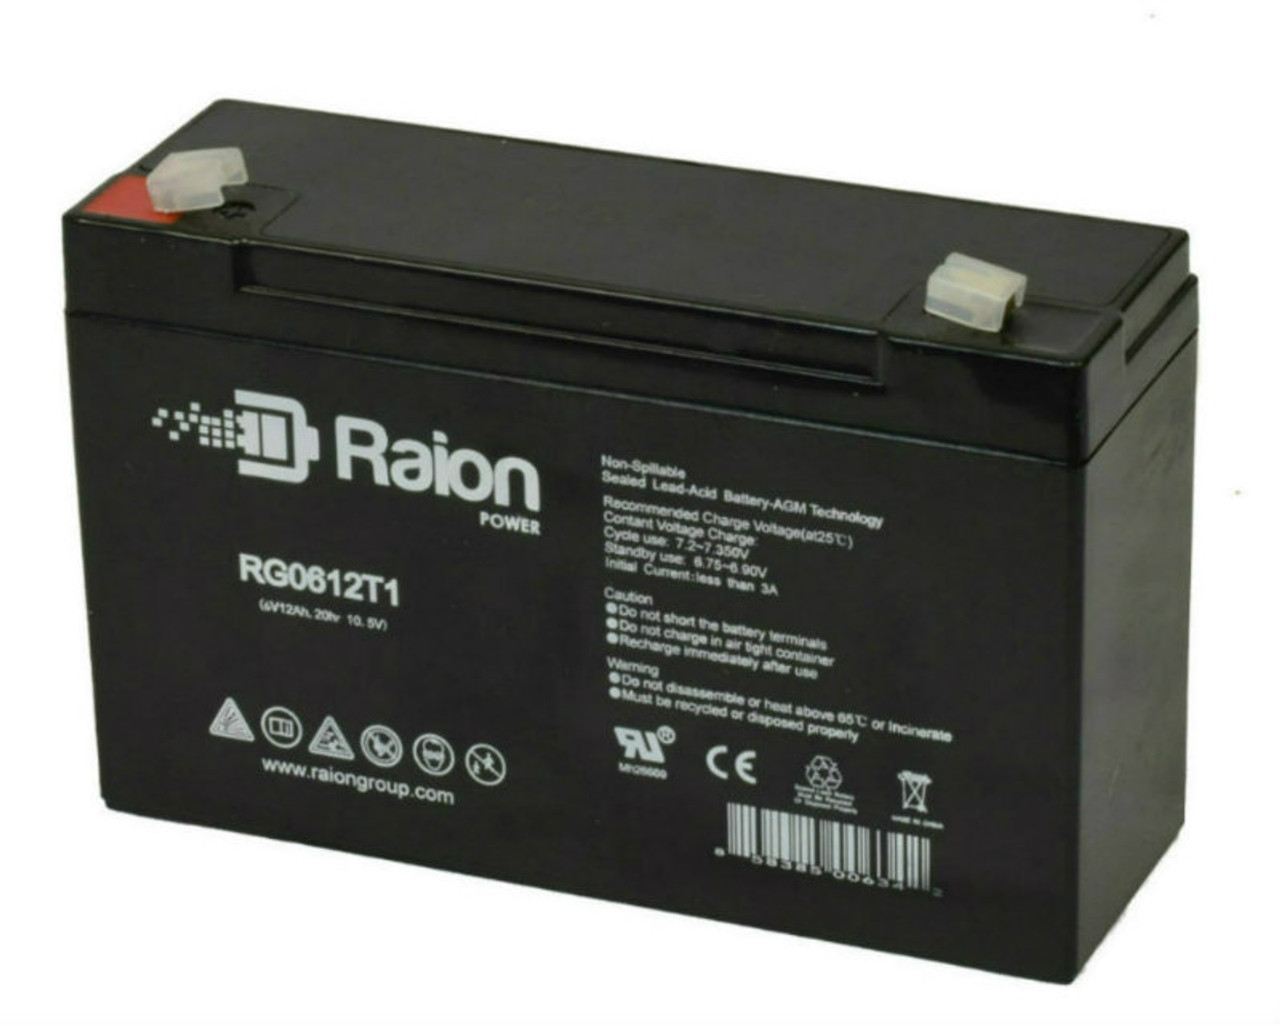 Raion Power RG06120T1 Replacement Battery for IBT Technologies BT12-6-F2